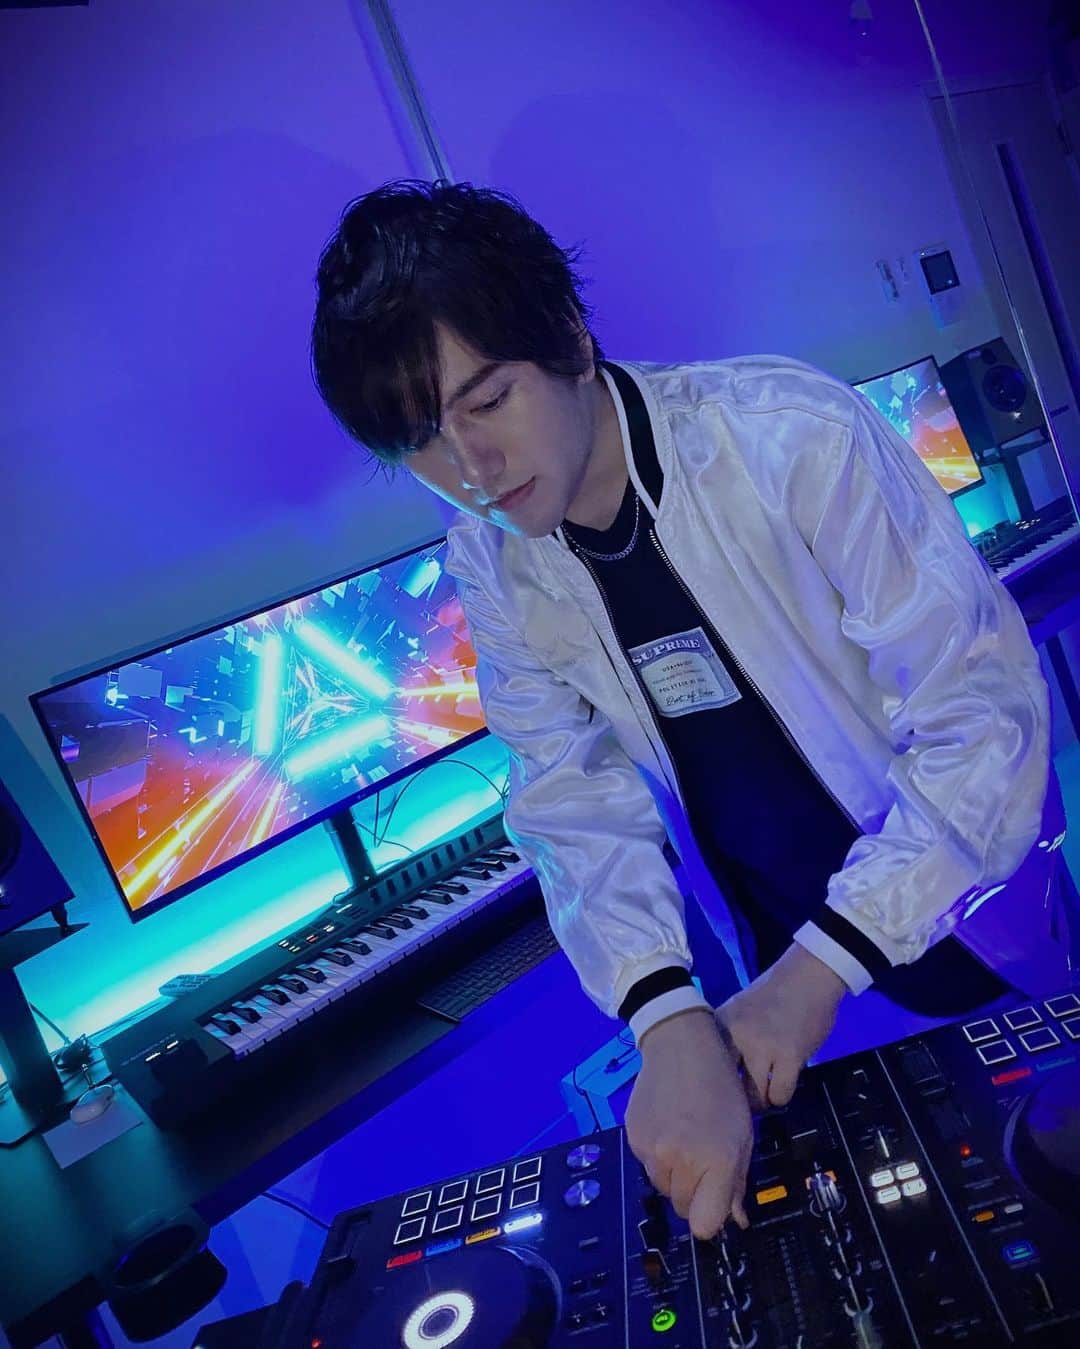 TeddyLoidのインスタグラム：「▲ TeddyLoid Ver. 31 ▲  31歳になりました⚡️ 今年に入ってから今まで以上に真剣に、そして楽しく音楽に向き合っているなと感じています。  周りにいてくれる皆、僕の音楽を聴いてくれる全ての方々へ、もっともっと沢山の音楽を届けます。  これからもTeddyLoidを宜しくお願いします🤝  ///  I’ve turned 31 today⚡️ I feel that I've been facing music more seriously and enjoying it more since the beginning of this year.  I hope I could deliver more and more music to everyone who is around me and everyone who listens to my music.  Thank you for your continued support of TeddyLoid 🤝  Location : Delta Networks Studio @deltanebula」